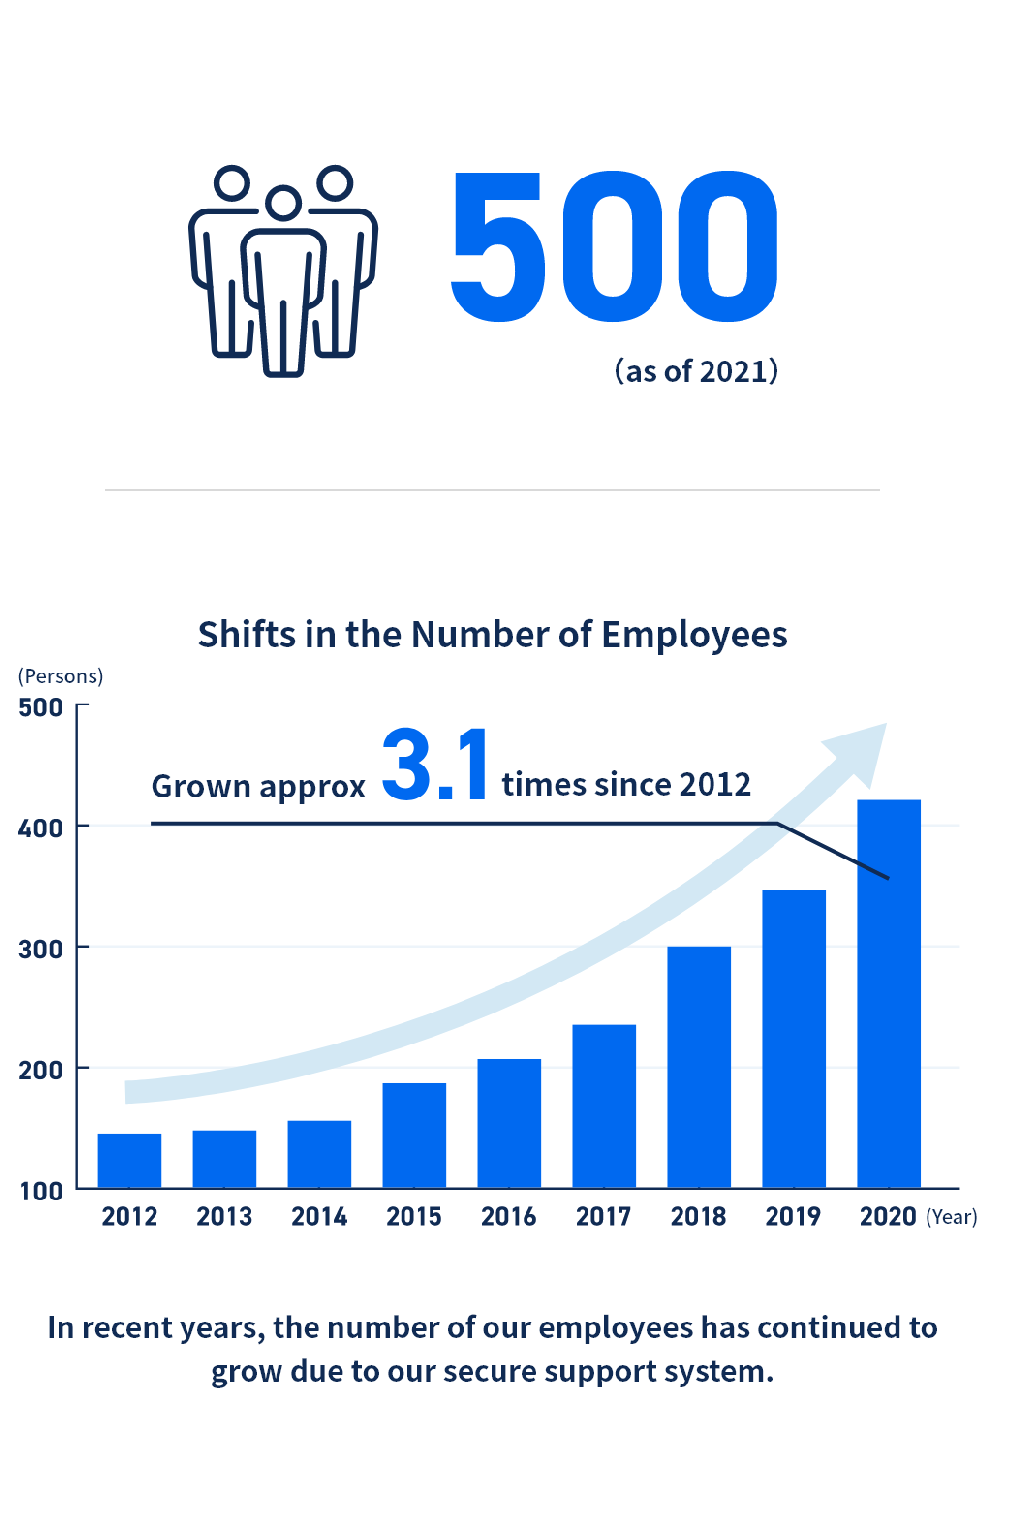 In recent years, the number of our employees has continued to grow due to our secure support system.